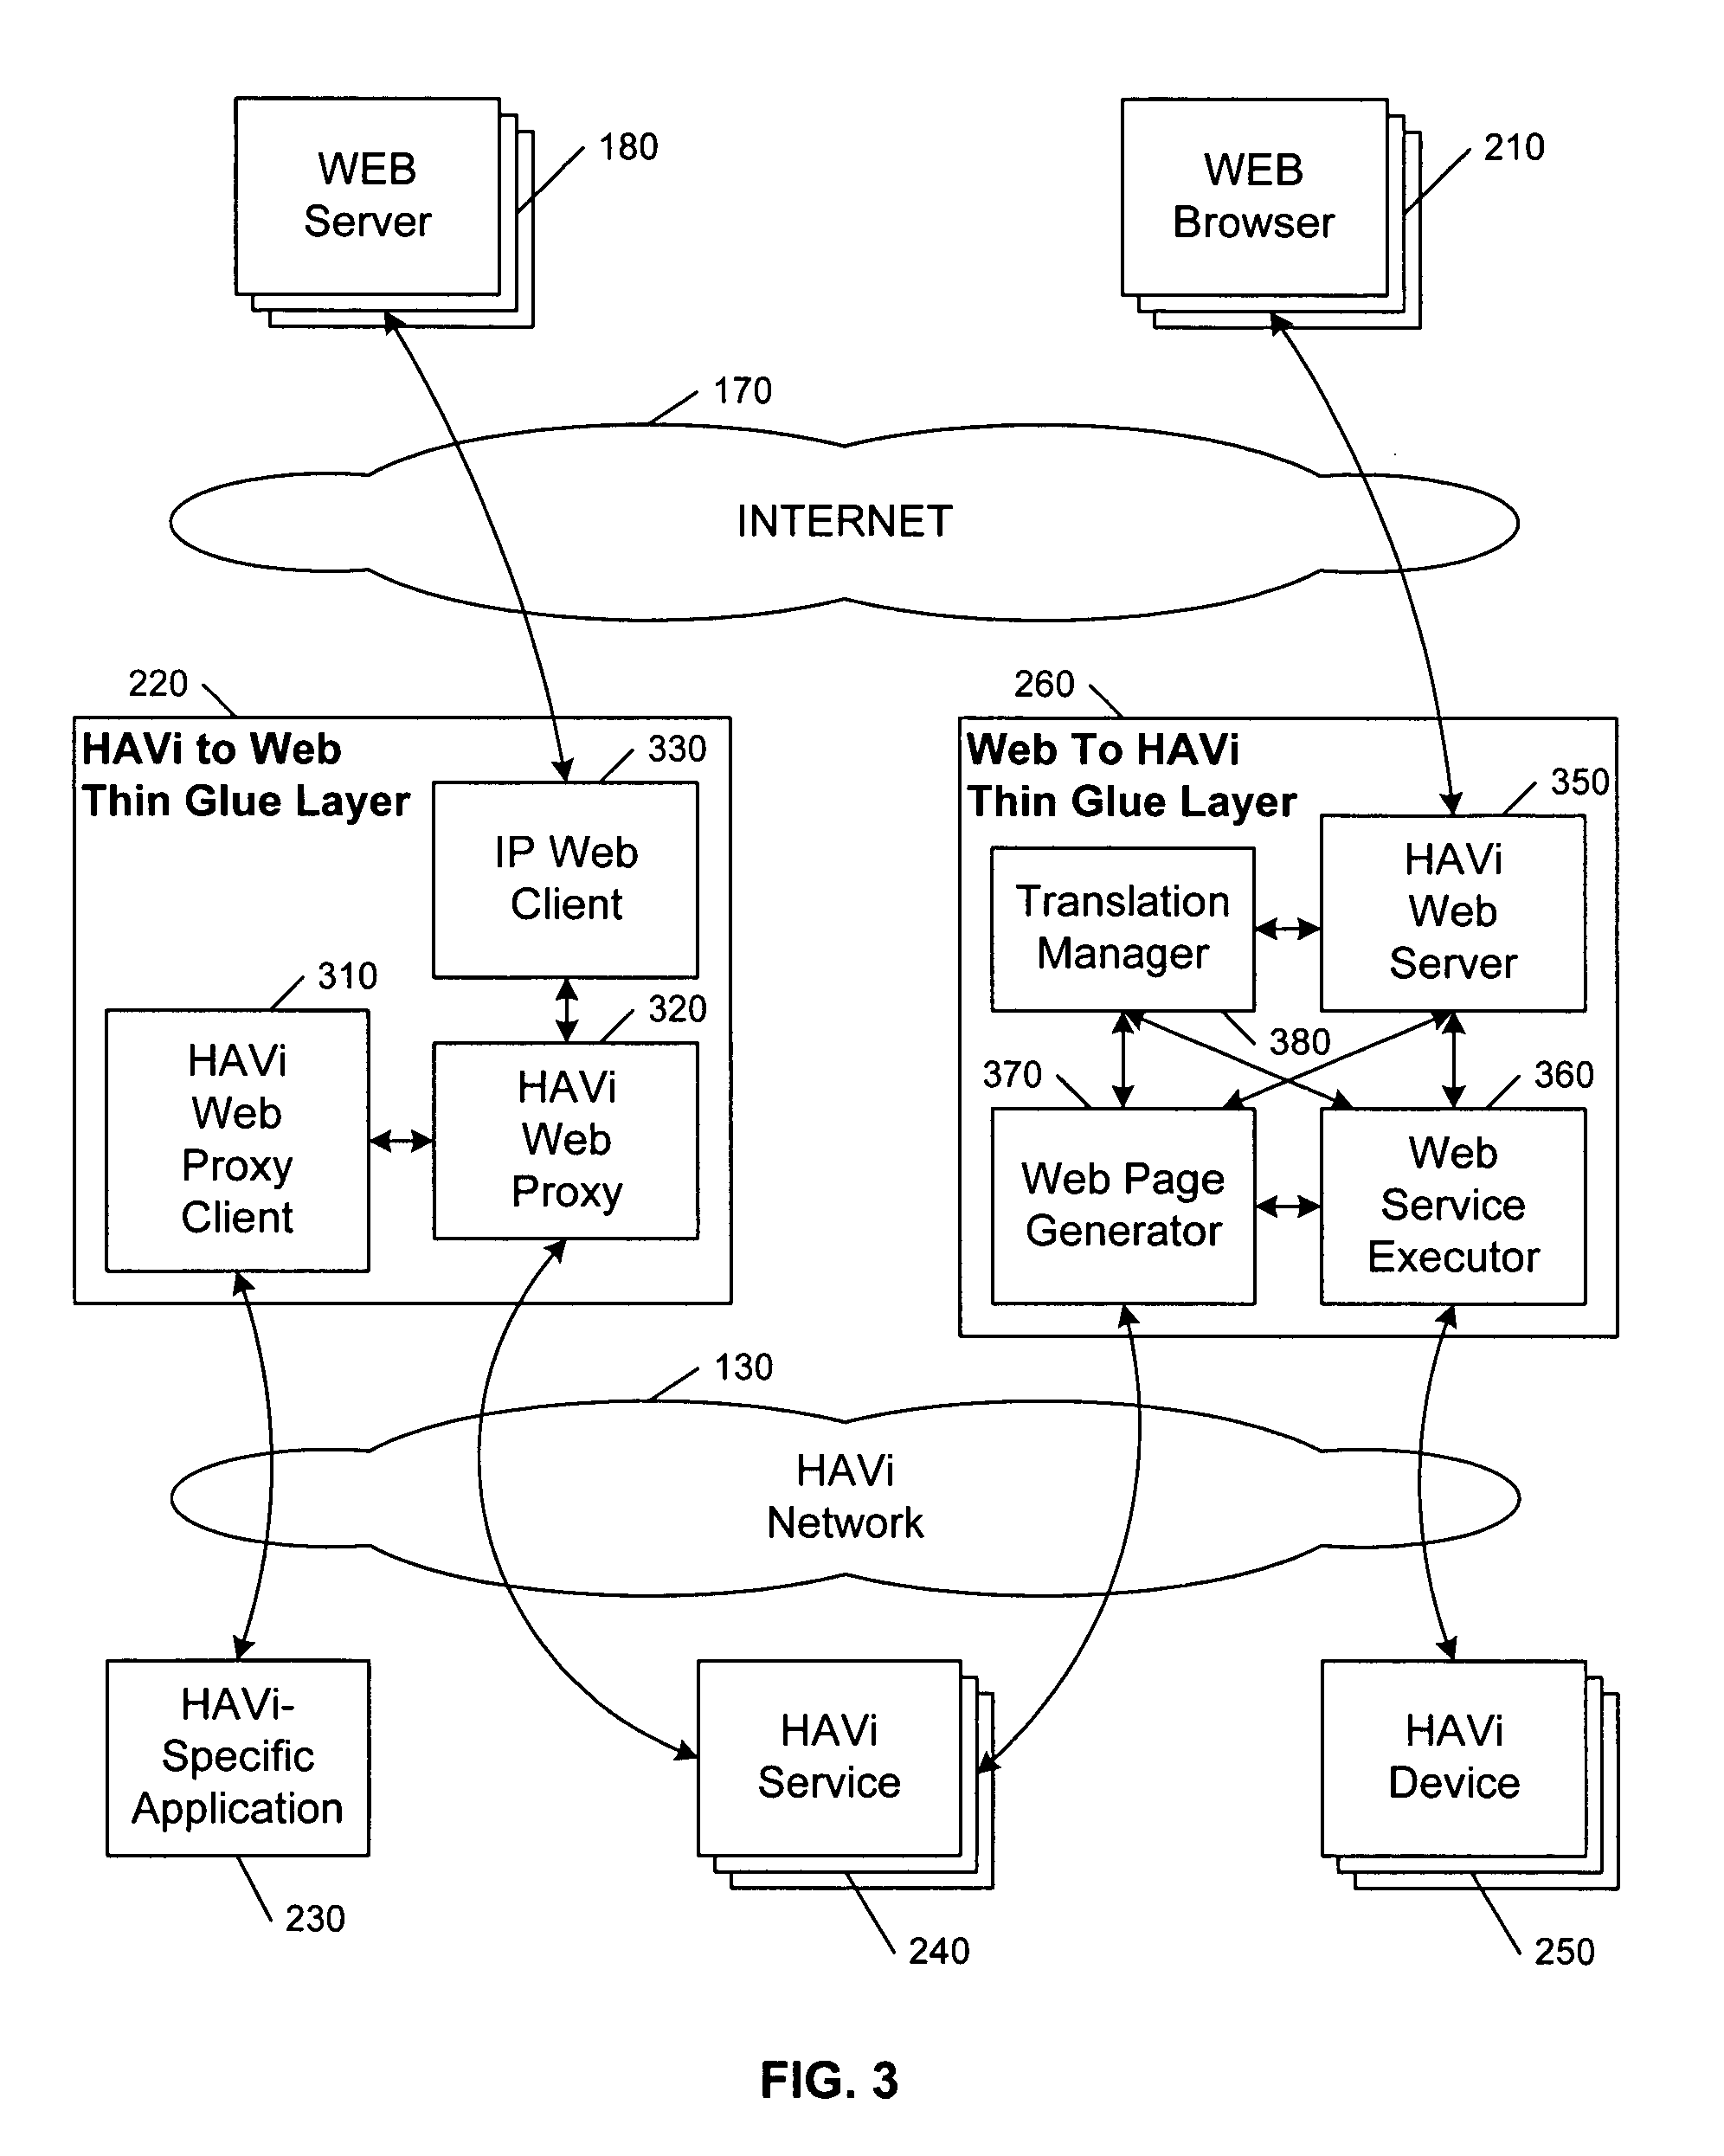 Architecture of a bridge between a non-IP network and the web